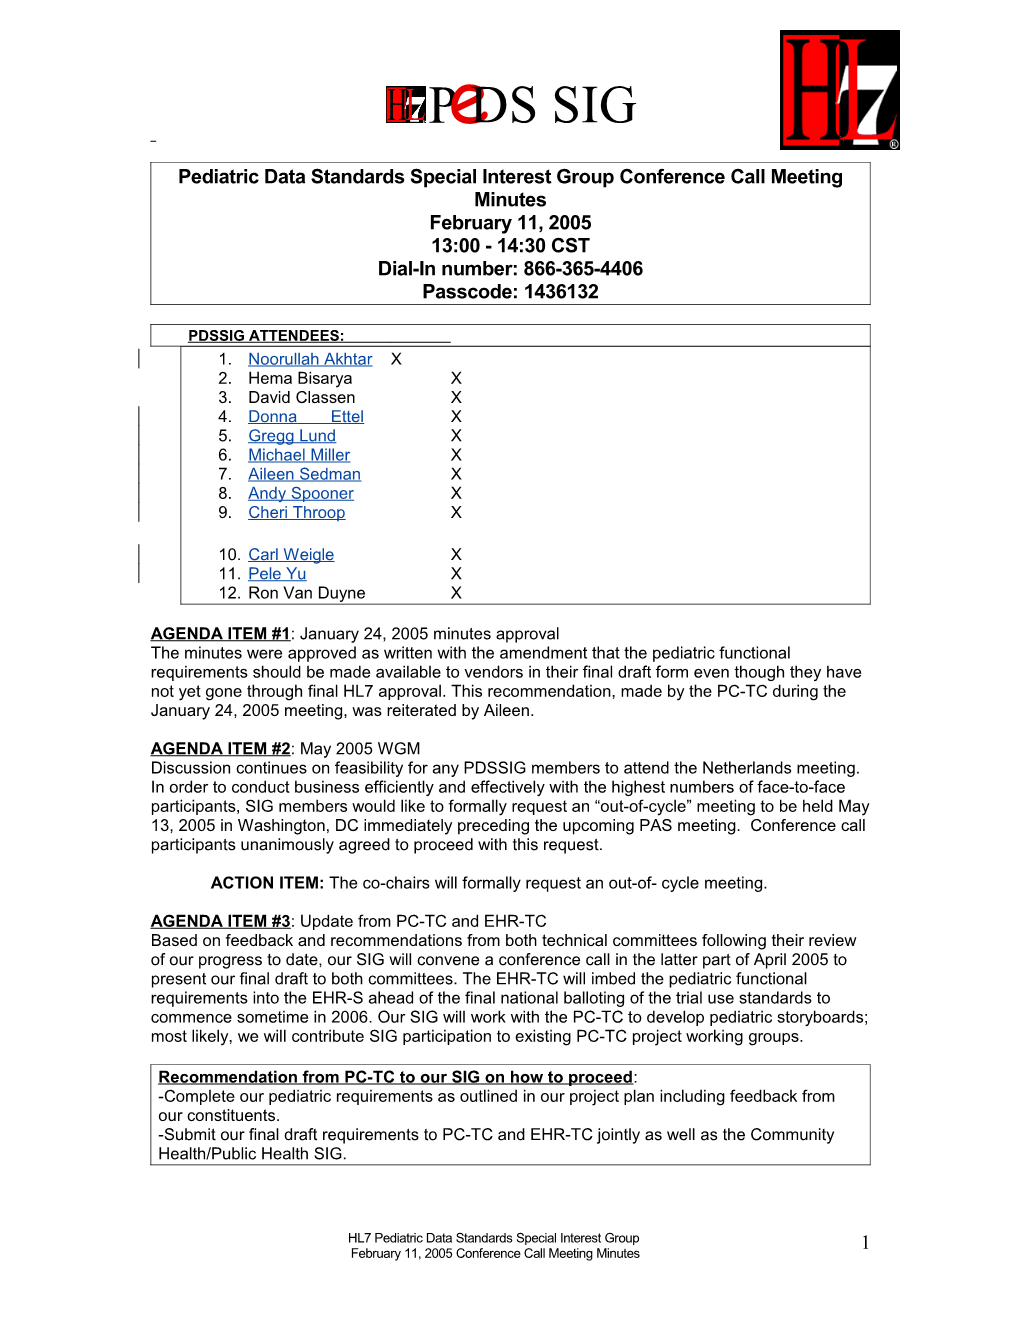 Pediatric Data Standards Special Interest Group Conference Call Meeting Minutes